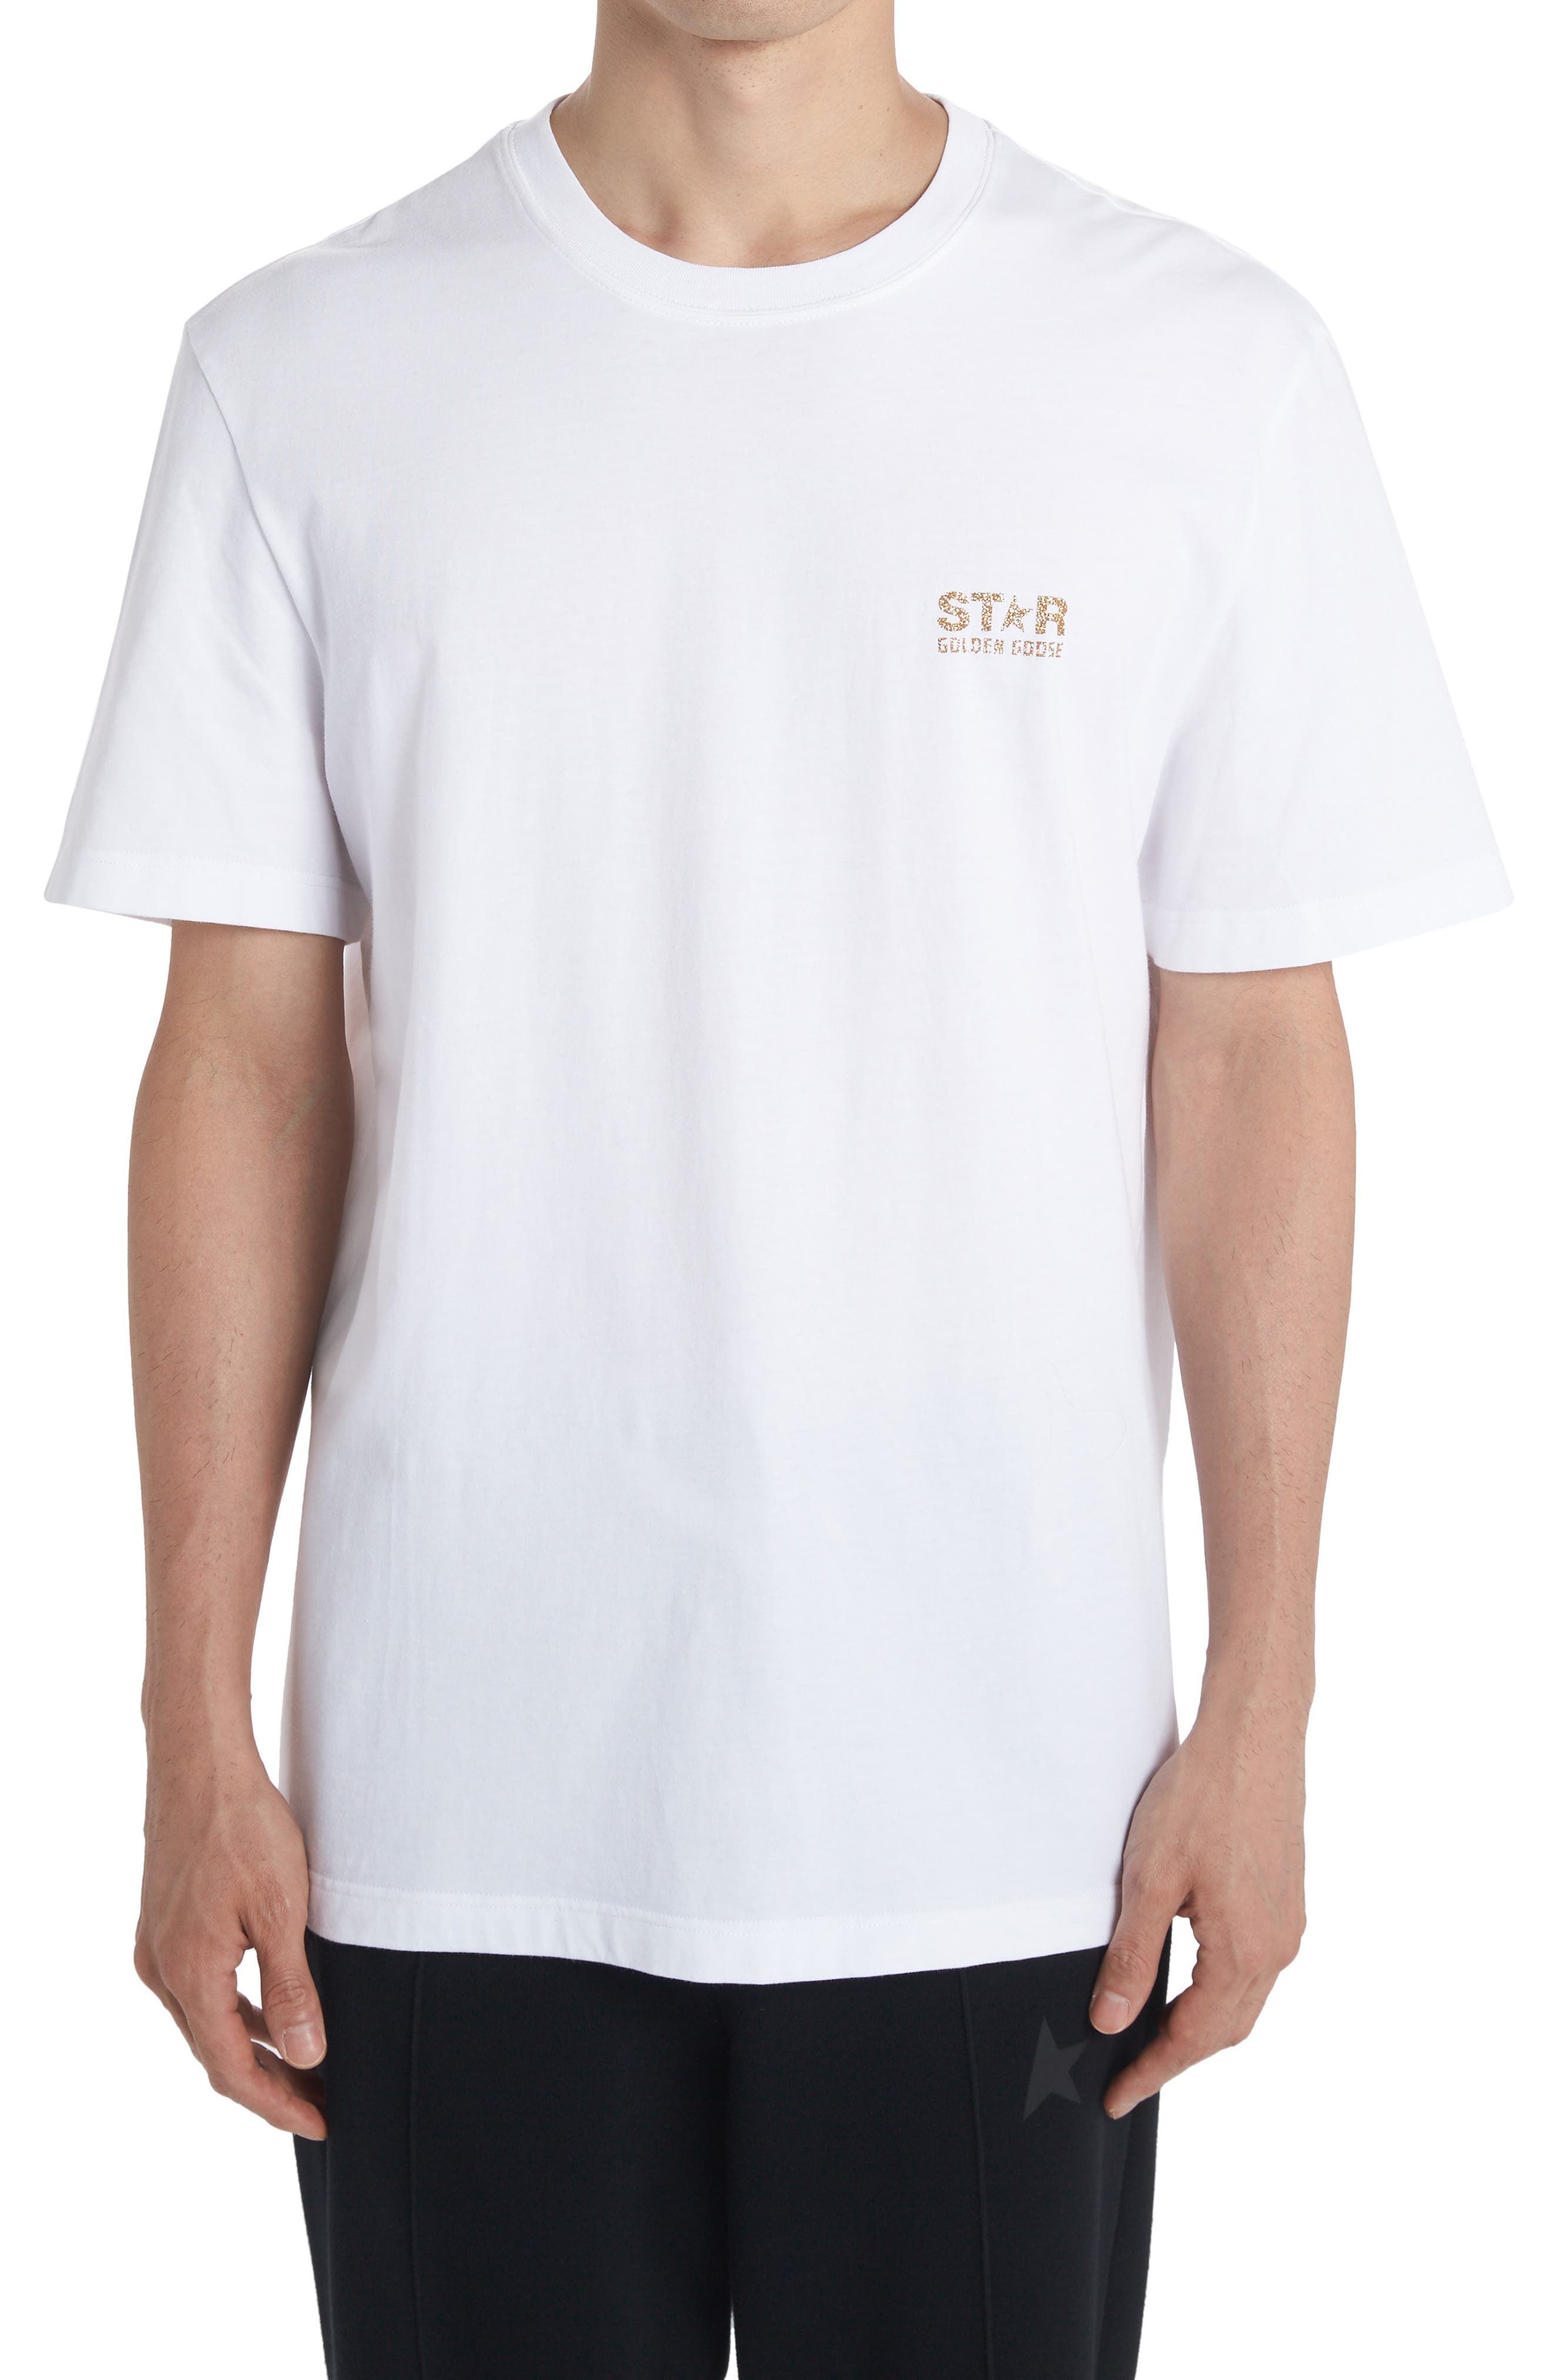 Golden Goose Star Logo Graphic Cotton Tee in White/Gold at Nordstrom, Size Xx-Large